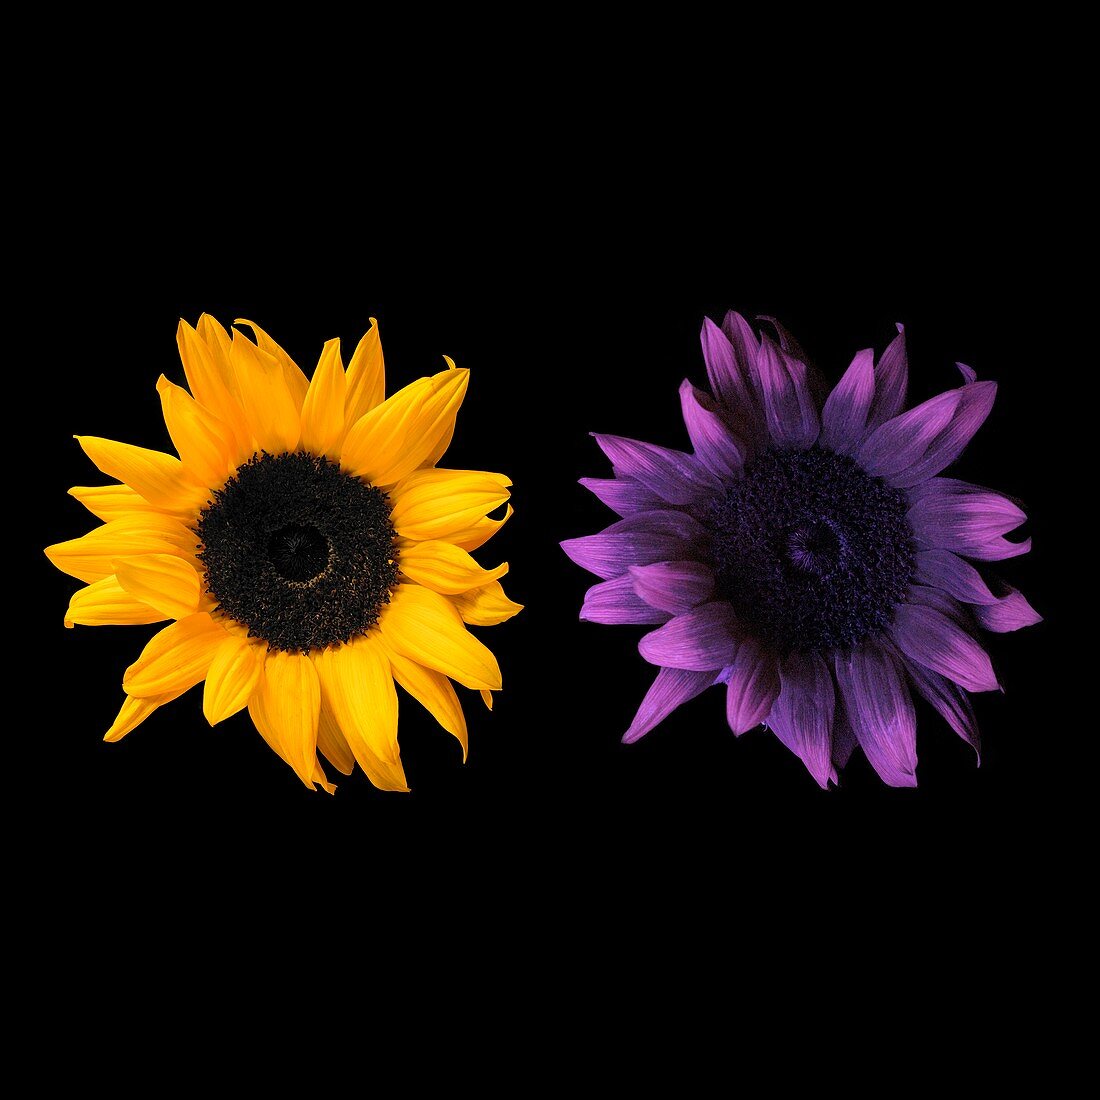 Sunflowers in UV and daylight